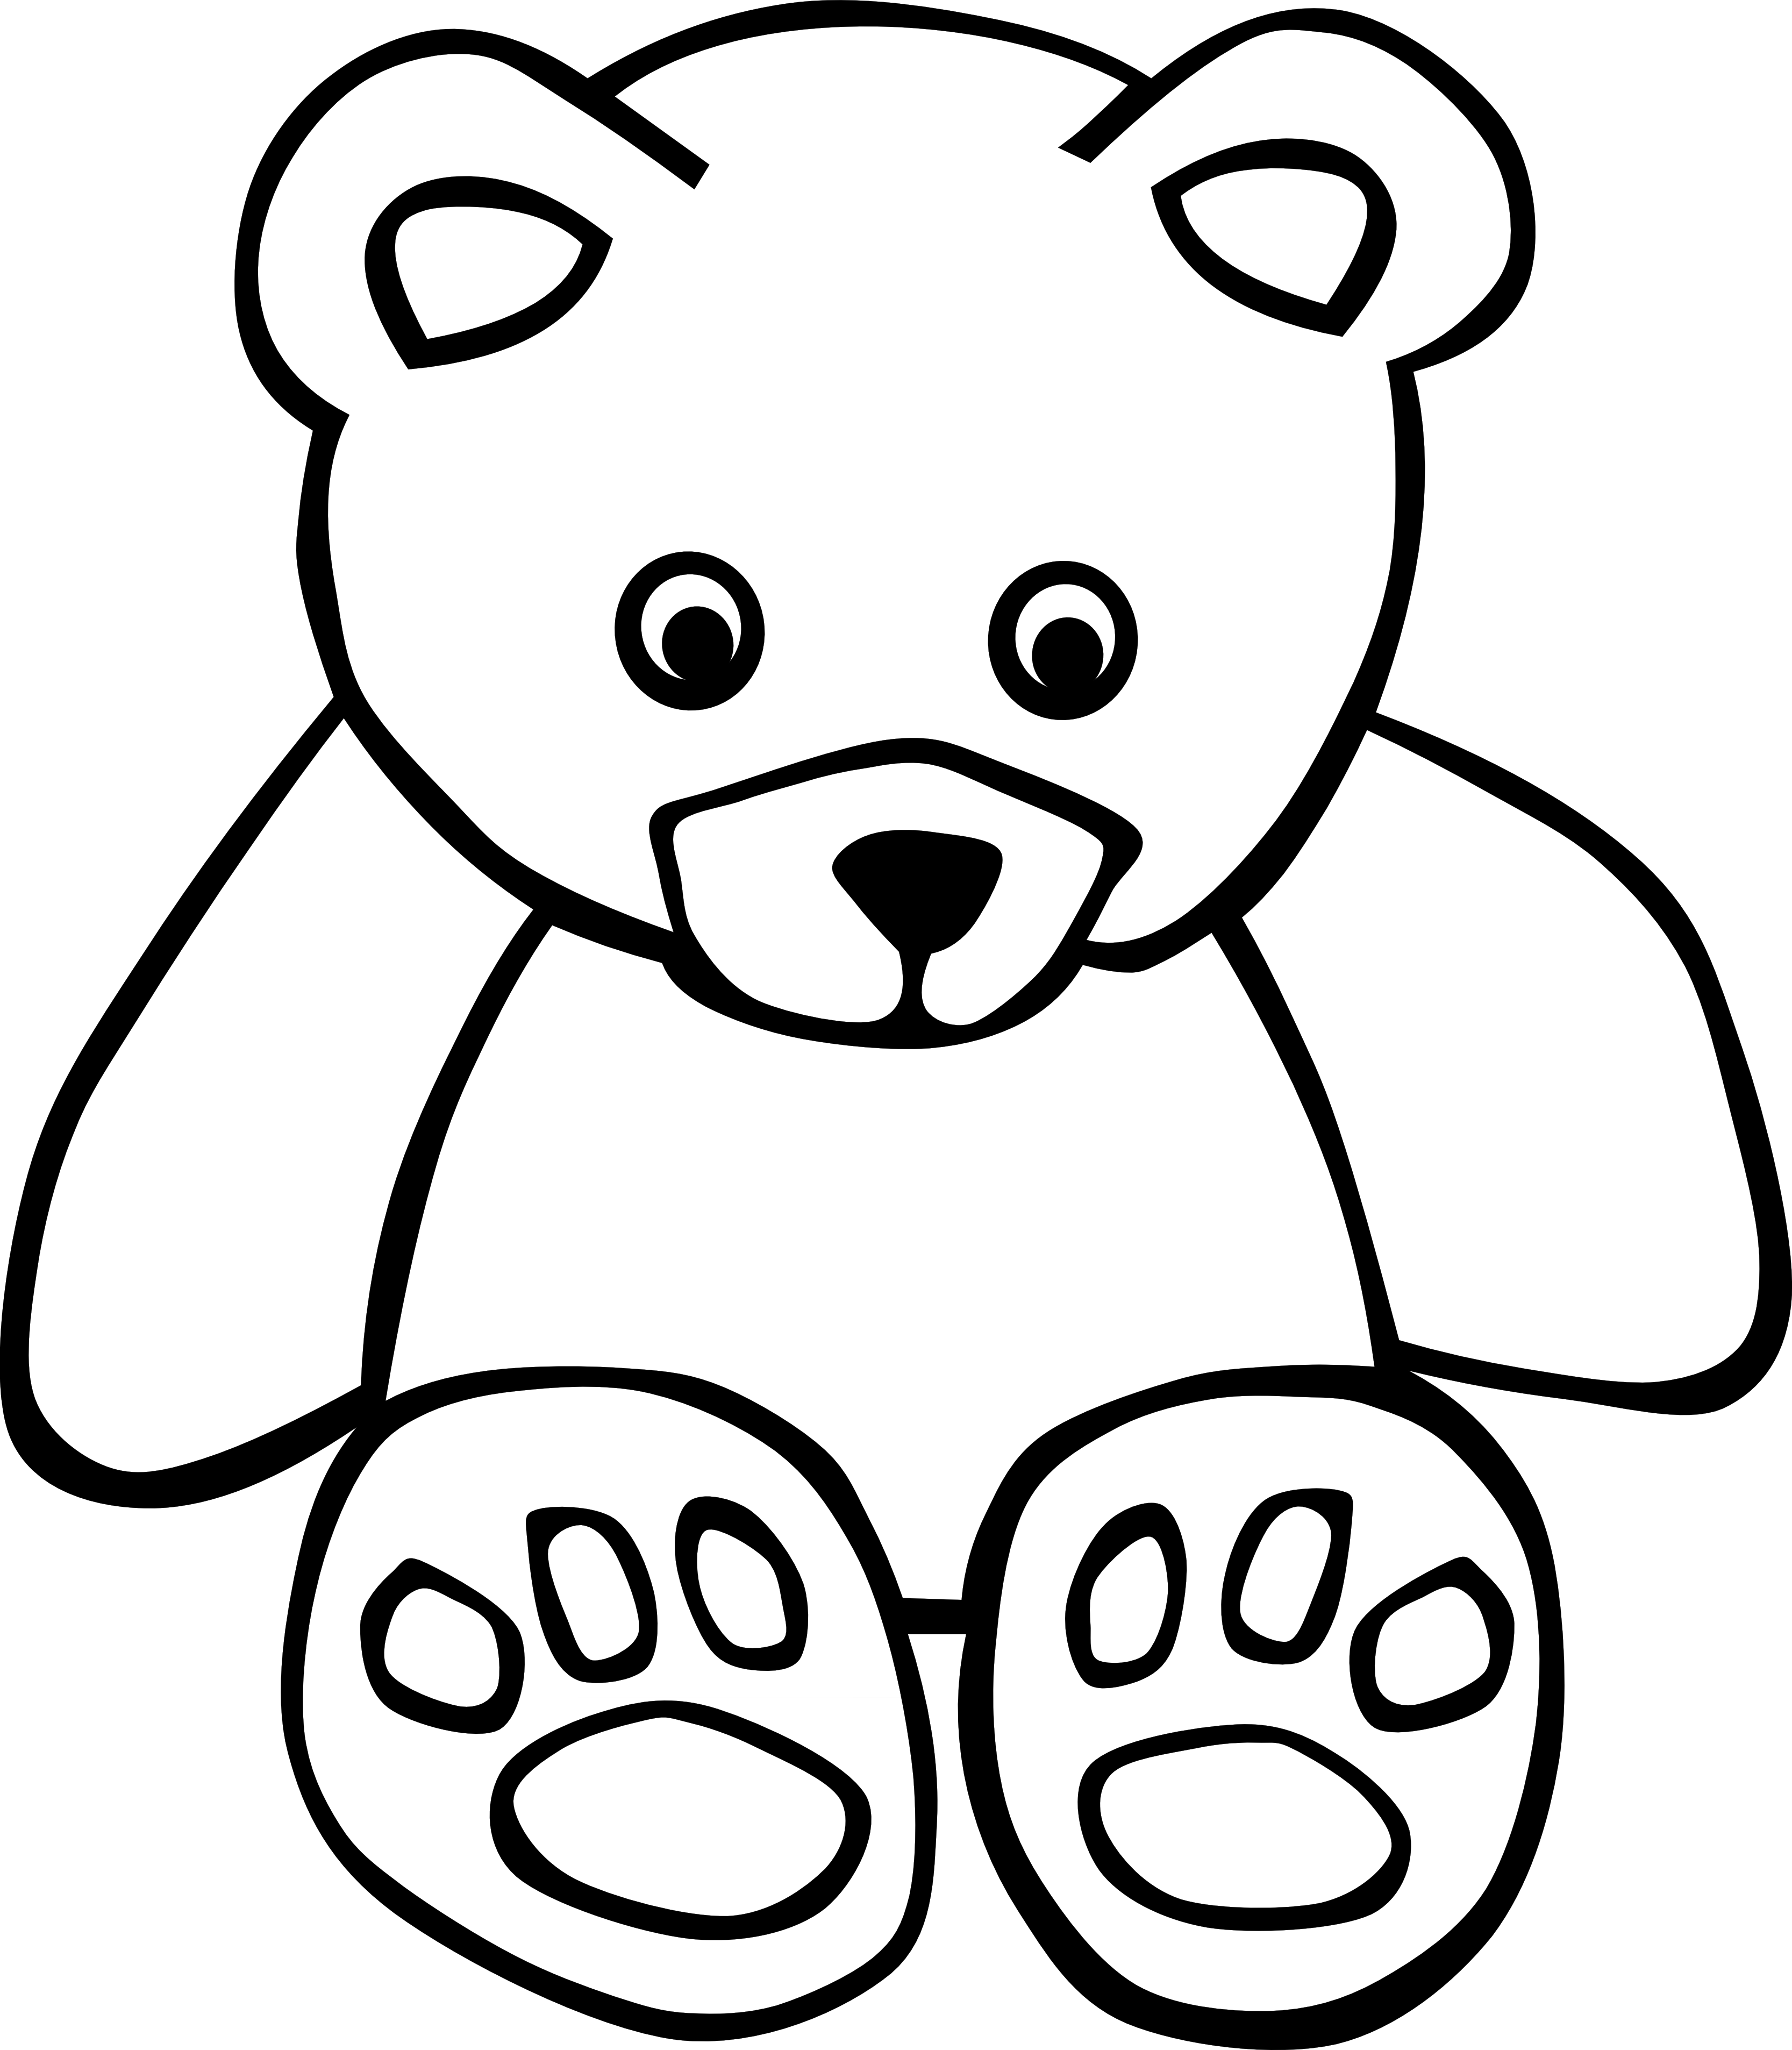 Cute Bear Clipart Black And White | Clipart library - Free Clipart 